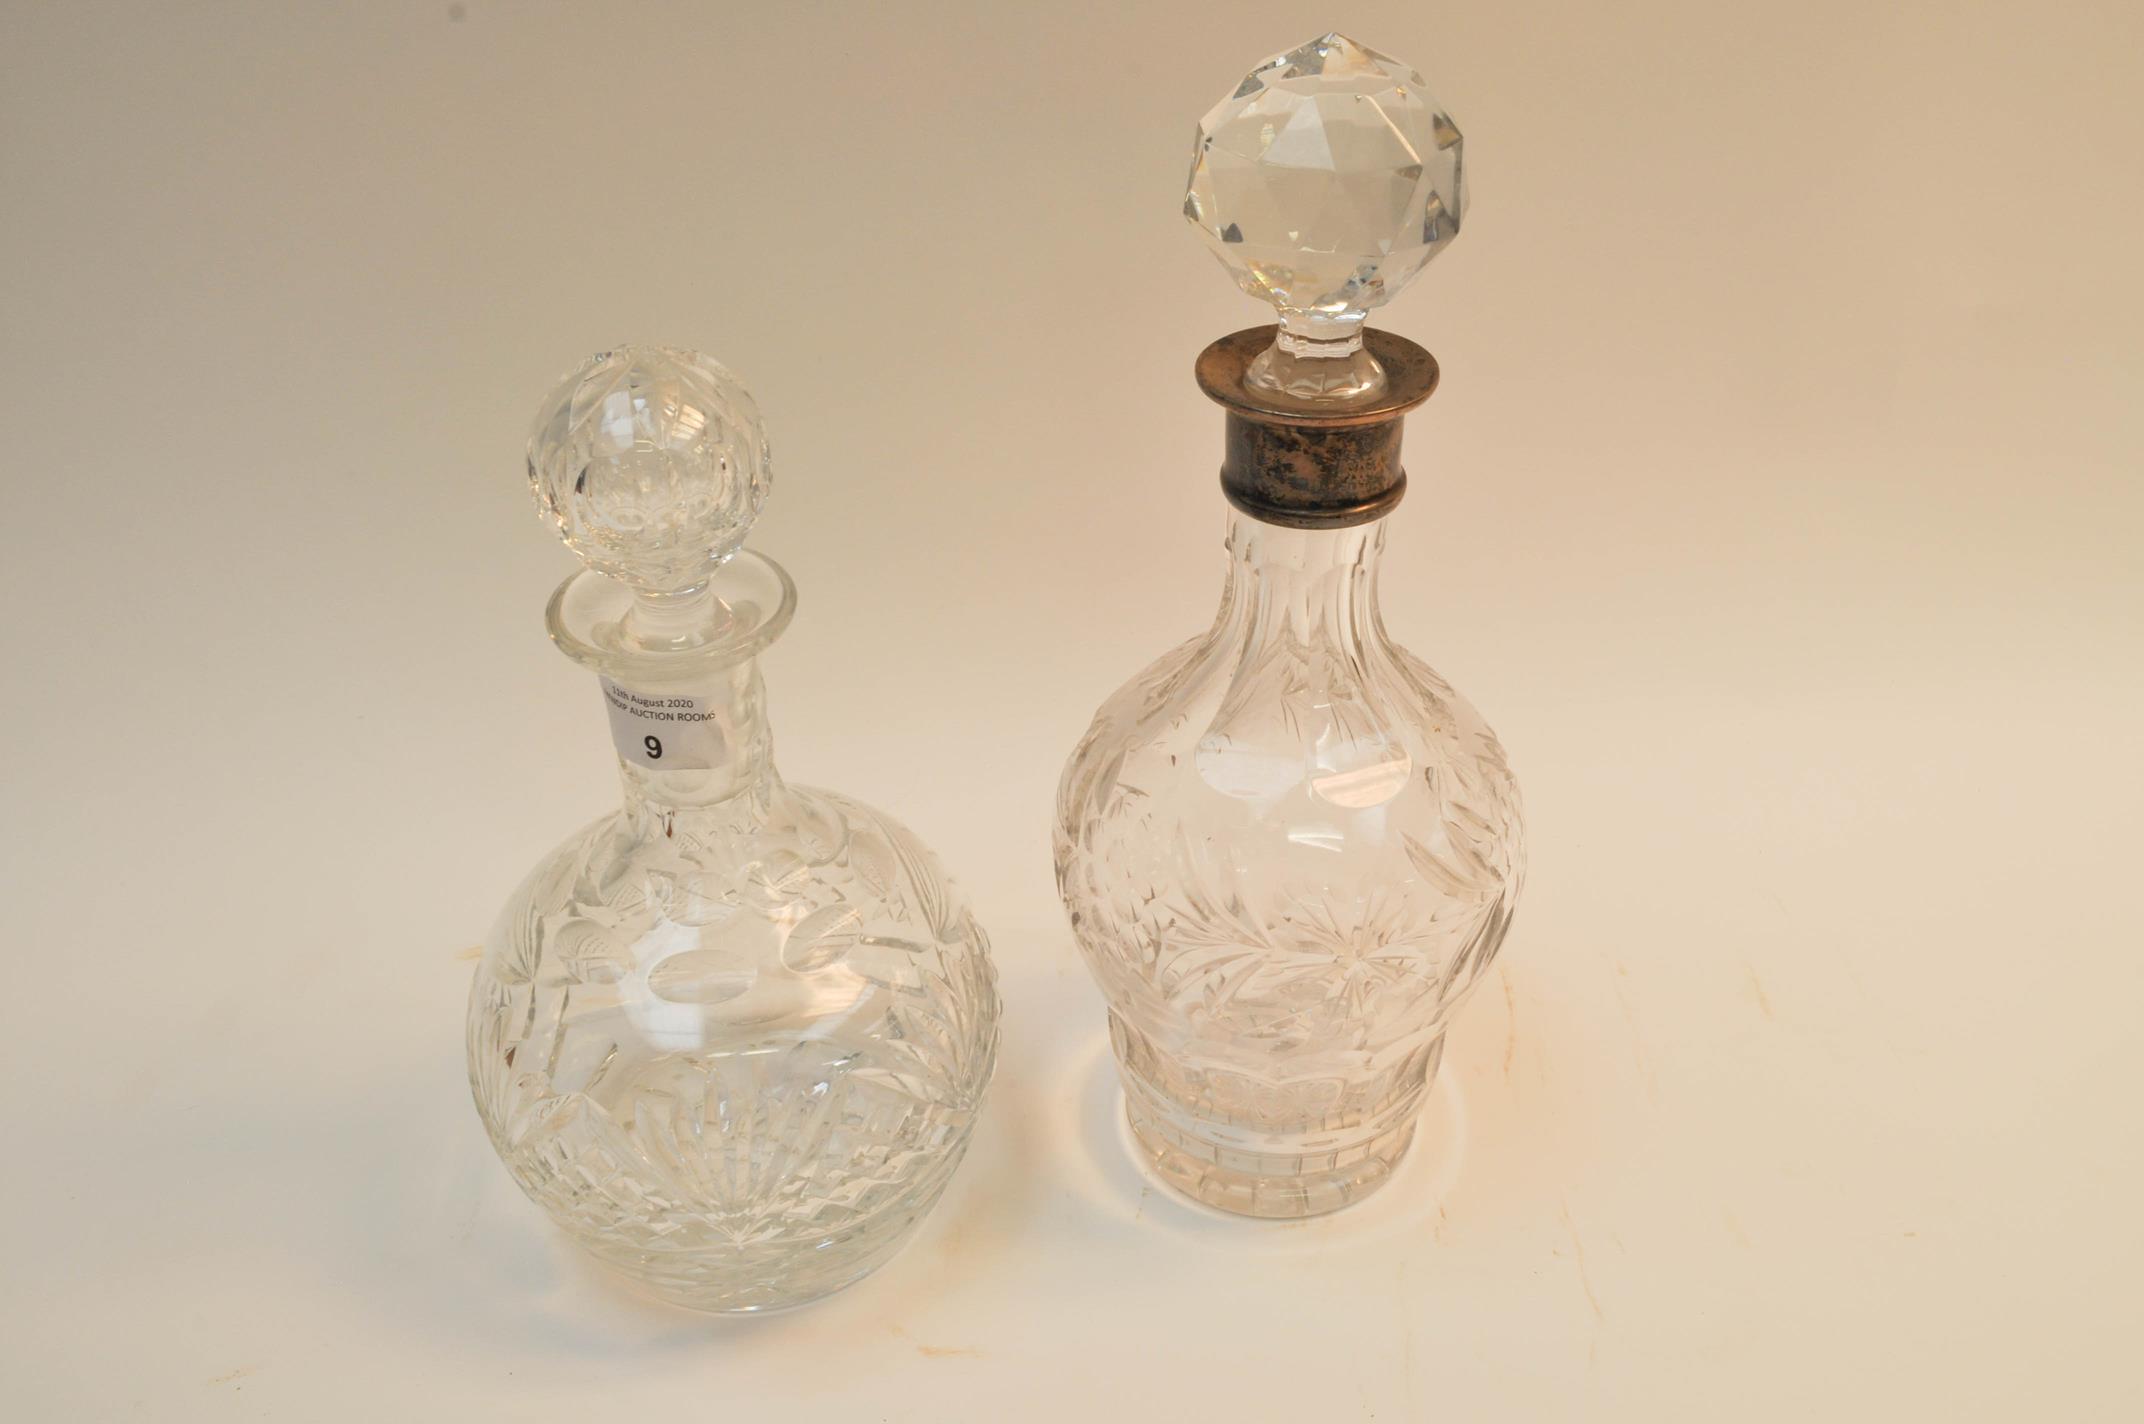 A silver collared cut glass decanter and another